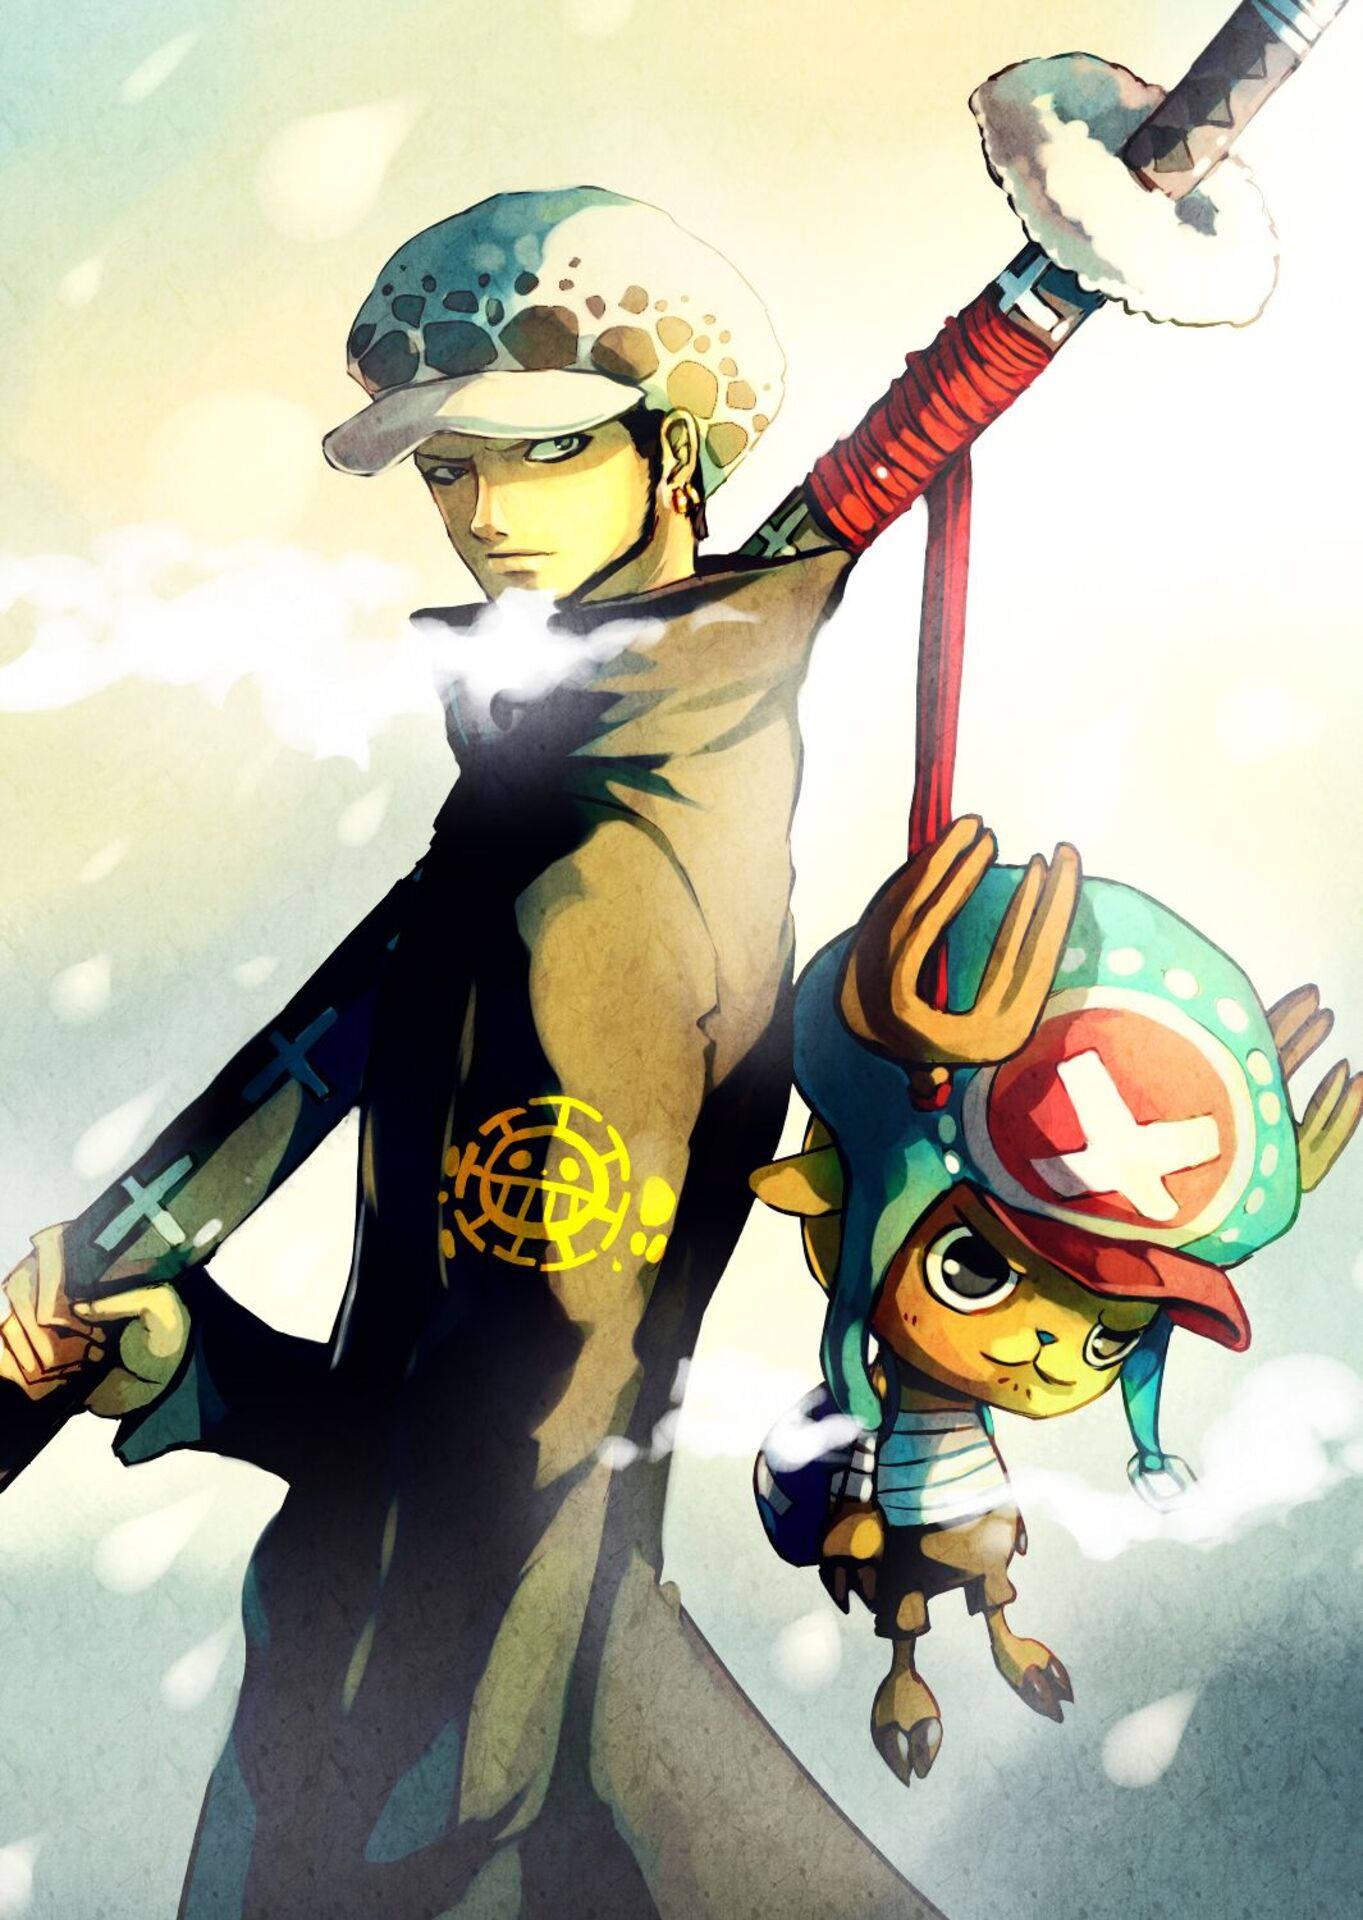 Trafalgar Law strikes fear into the hearts of enemies with Chopper by his side Wallpaper